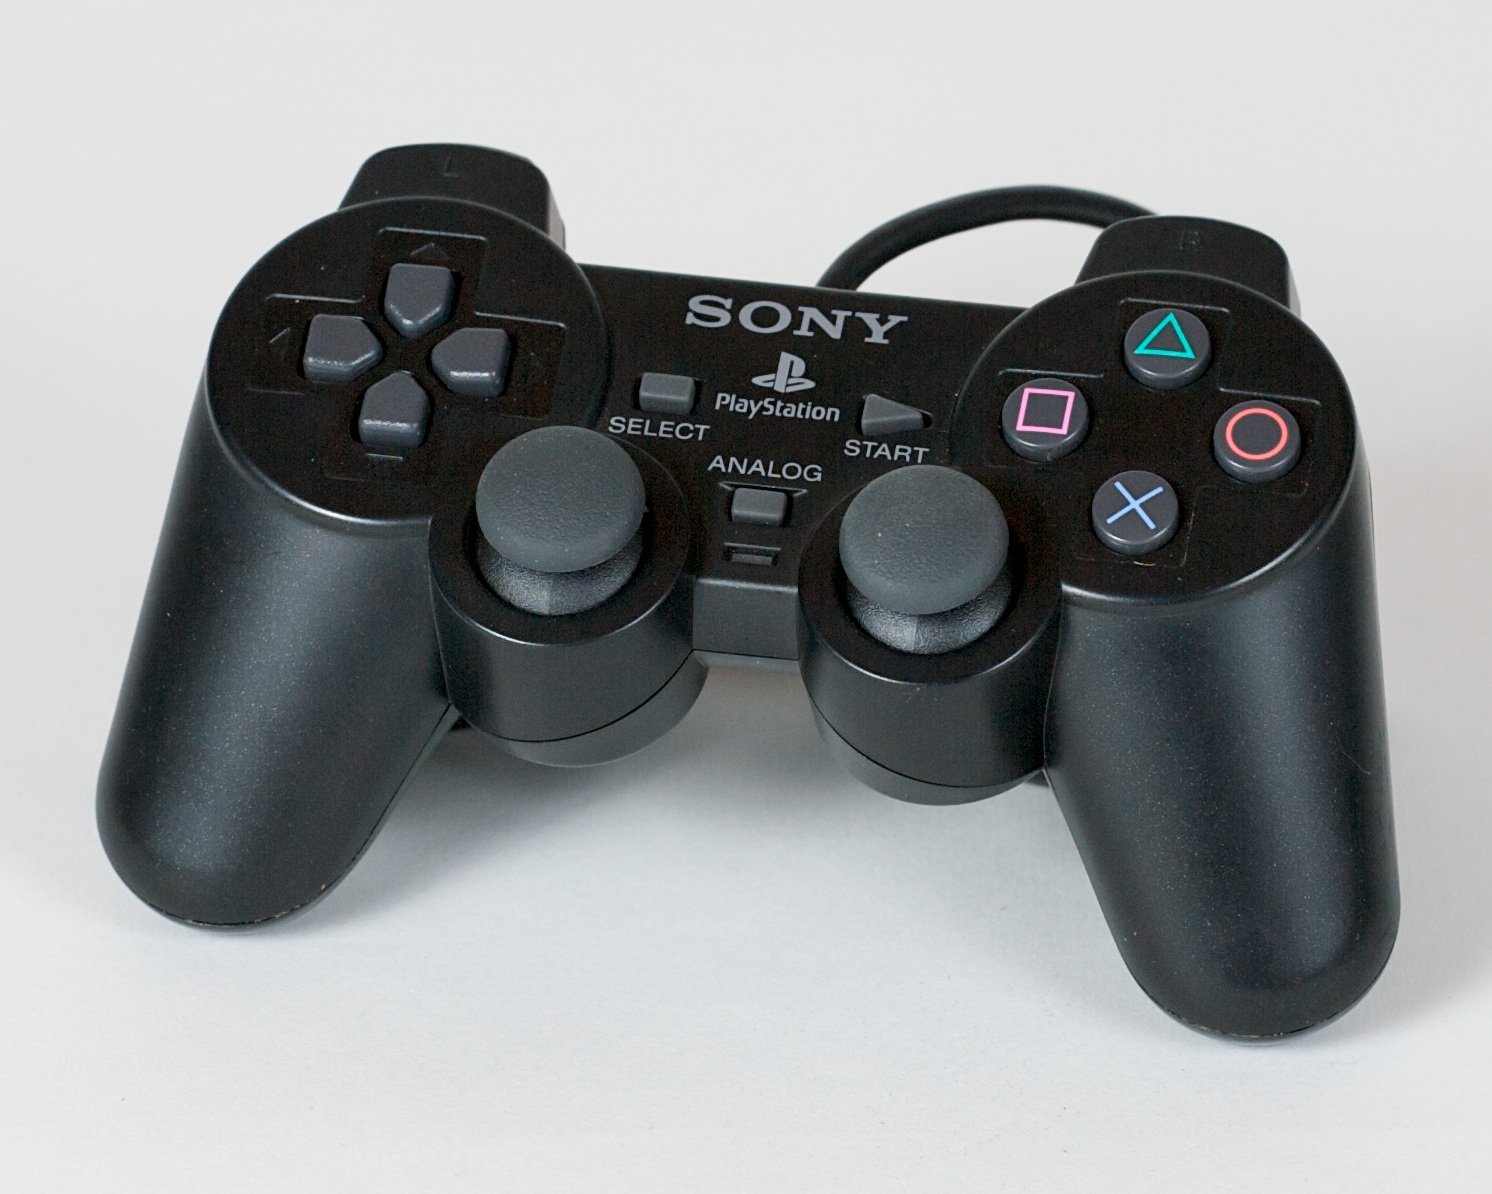 can you use dualshock 2 on ps1